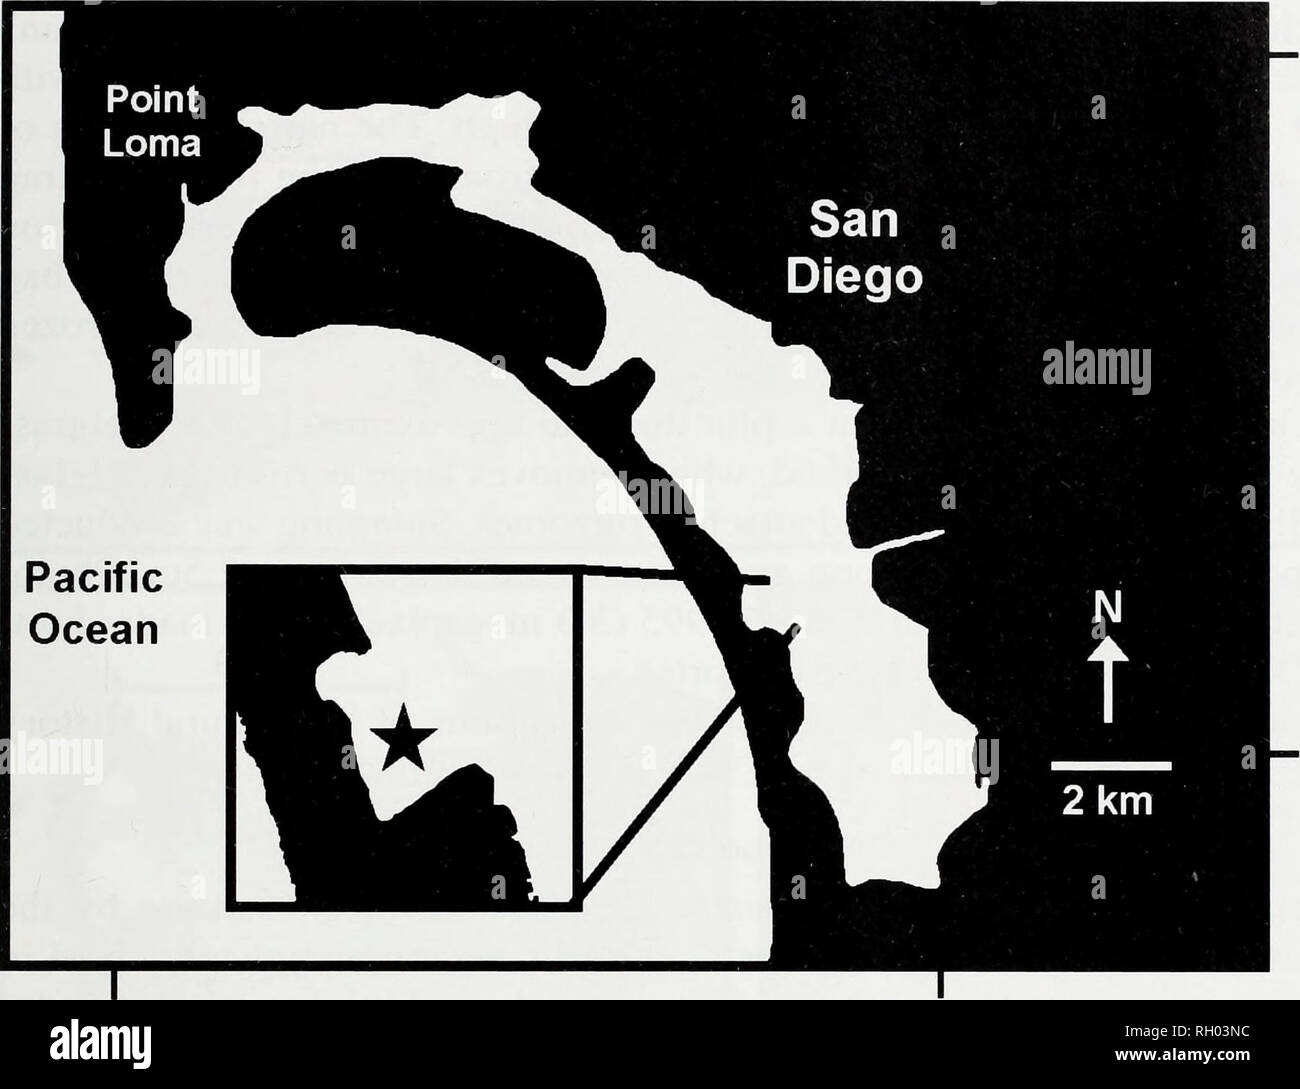 . Bulletin. Science. REDISCOVERY OF THE LAOMEDIID SHRIMP NAUSHONIA MACGINITIEI 147. 32° 44' W 32° 37' W 117° 14'W 117° 07'W Fig. 1. Map of San Diego Bay with star indicating the location of the eelgrass harvesting exper- iment and specimen collection site. lished reports by southern California biologists of laomediid larvae that almost undoubtedly belong to this species (as there are no other laomediids known from southern California) (Don Cadien, personal communication). In January of 2004, a specimen of Naushonia macginitiei was collected from a large, shallow eelgrass (Zostera marina) bed s Stock Photo